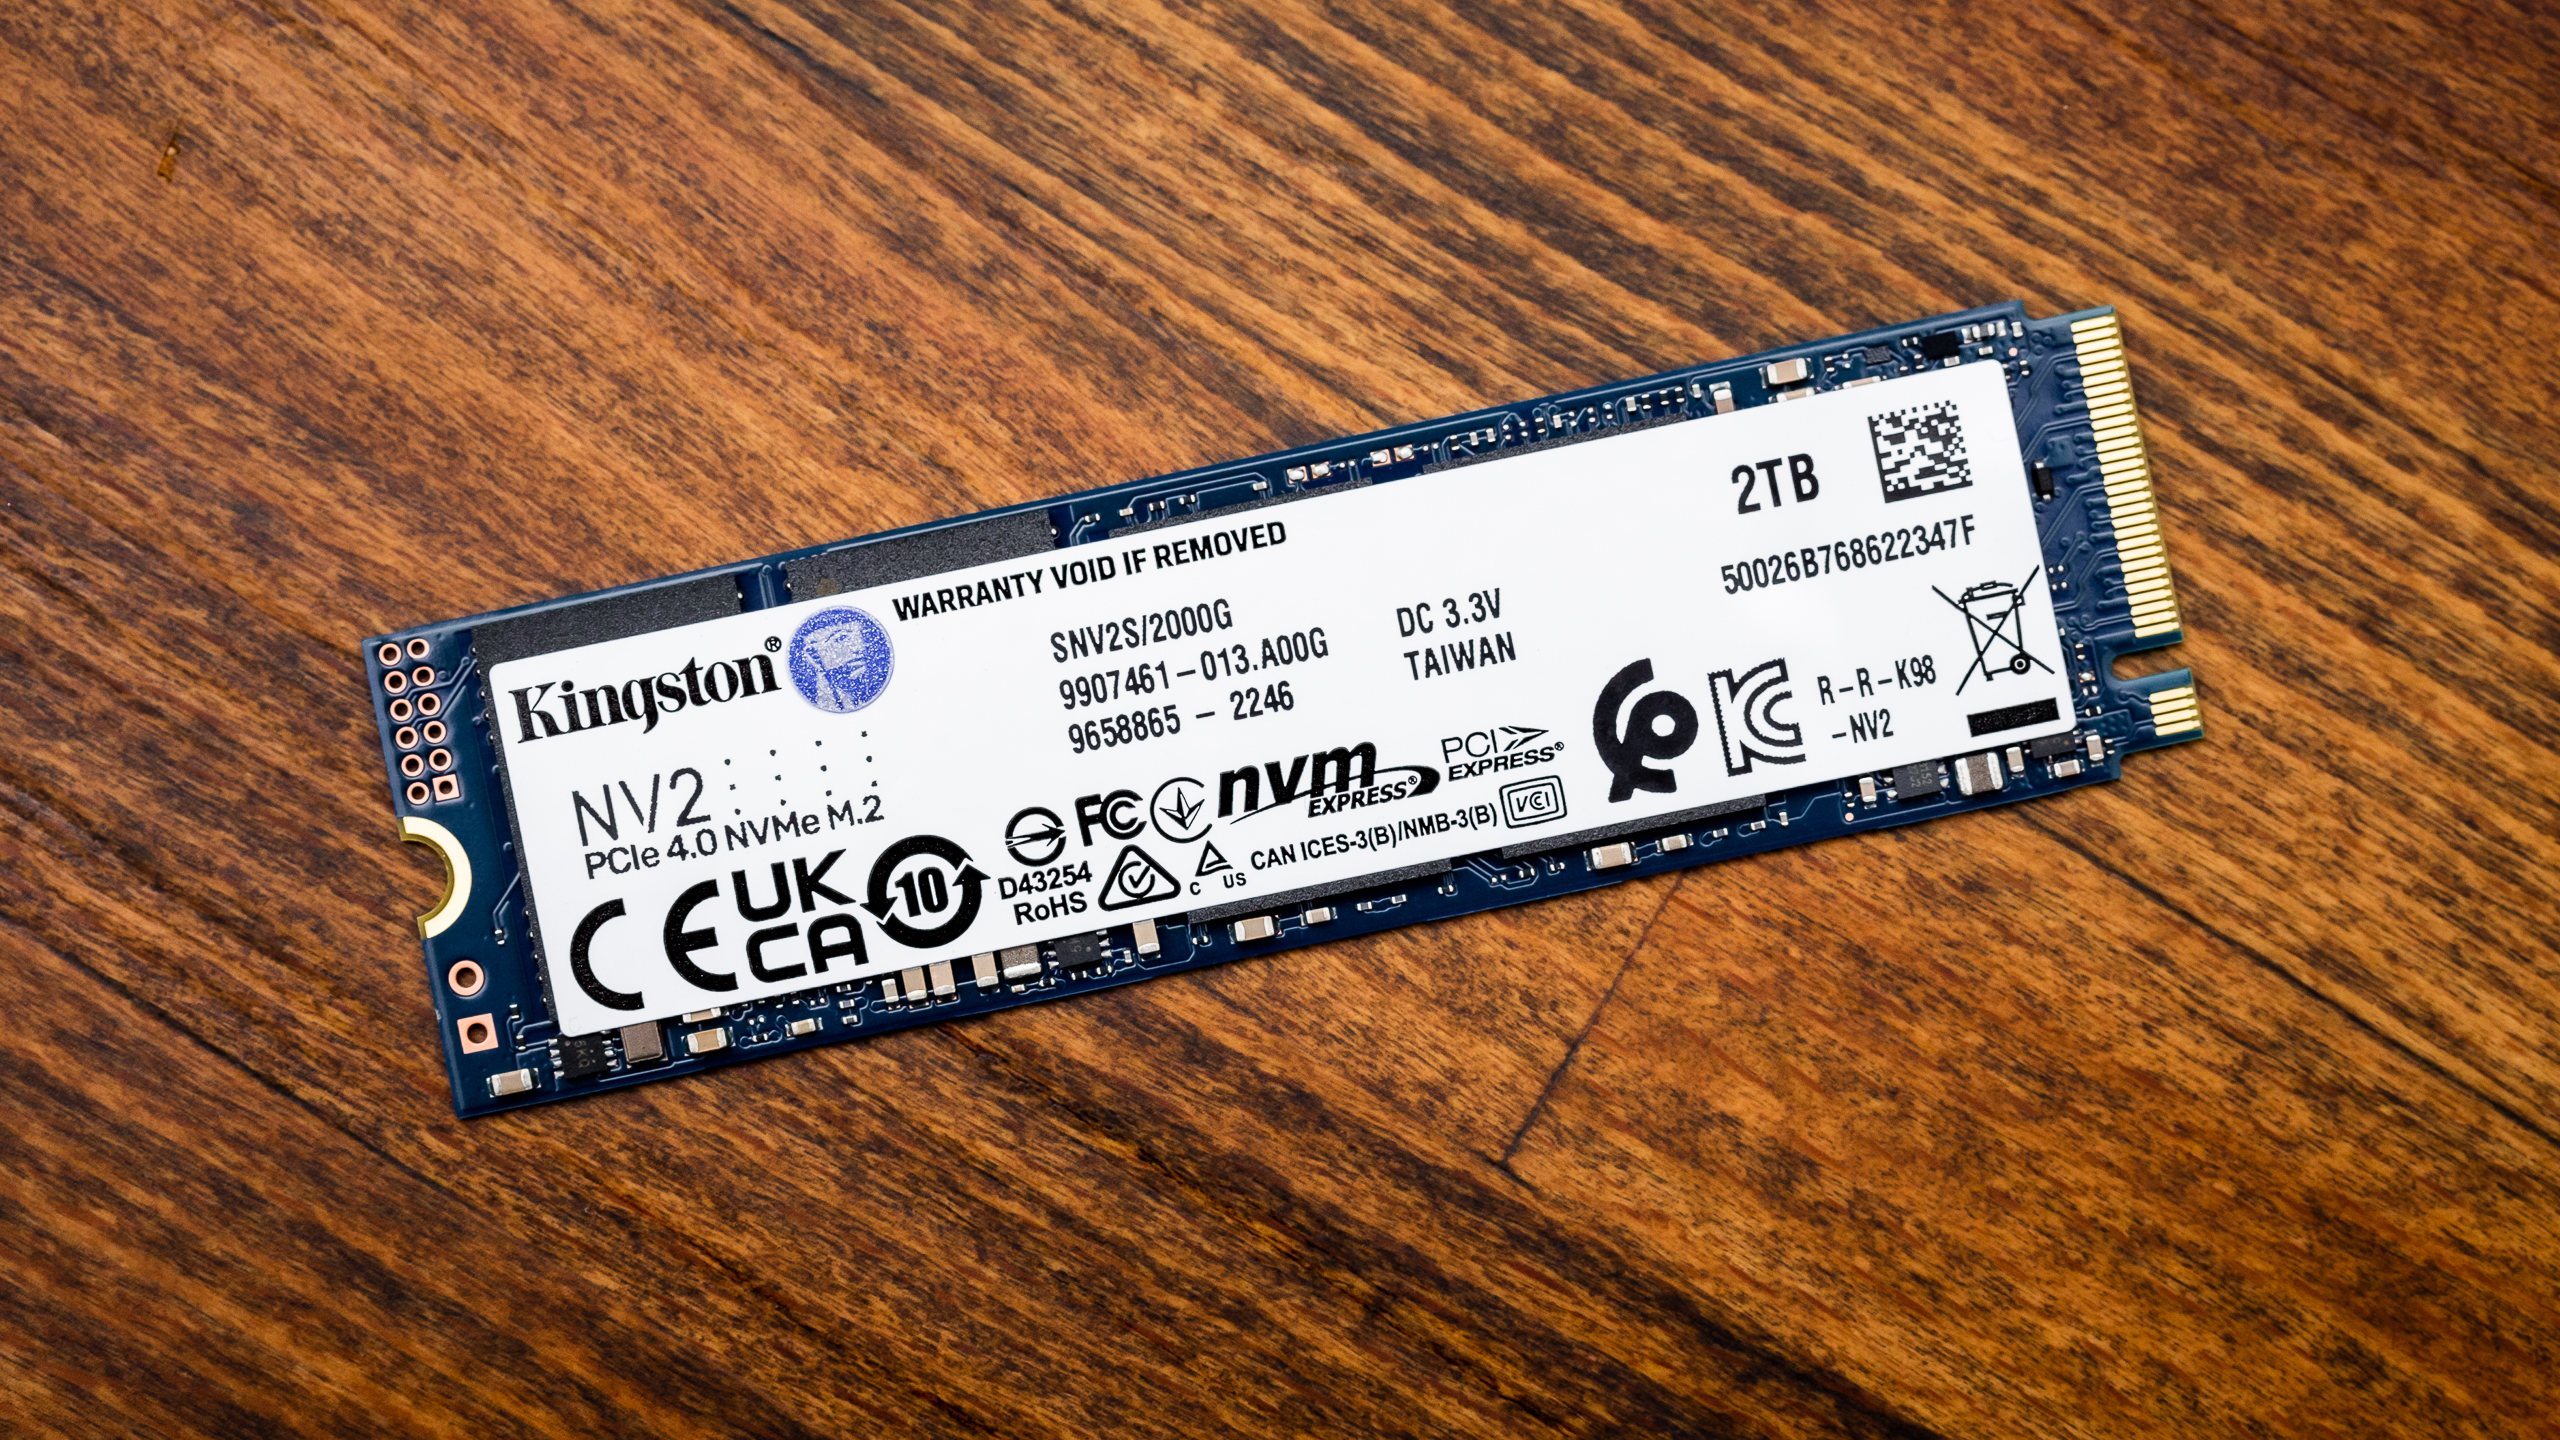 NV2 SSD Review: Cheap But Risky | Tom's Hardware